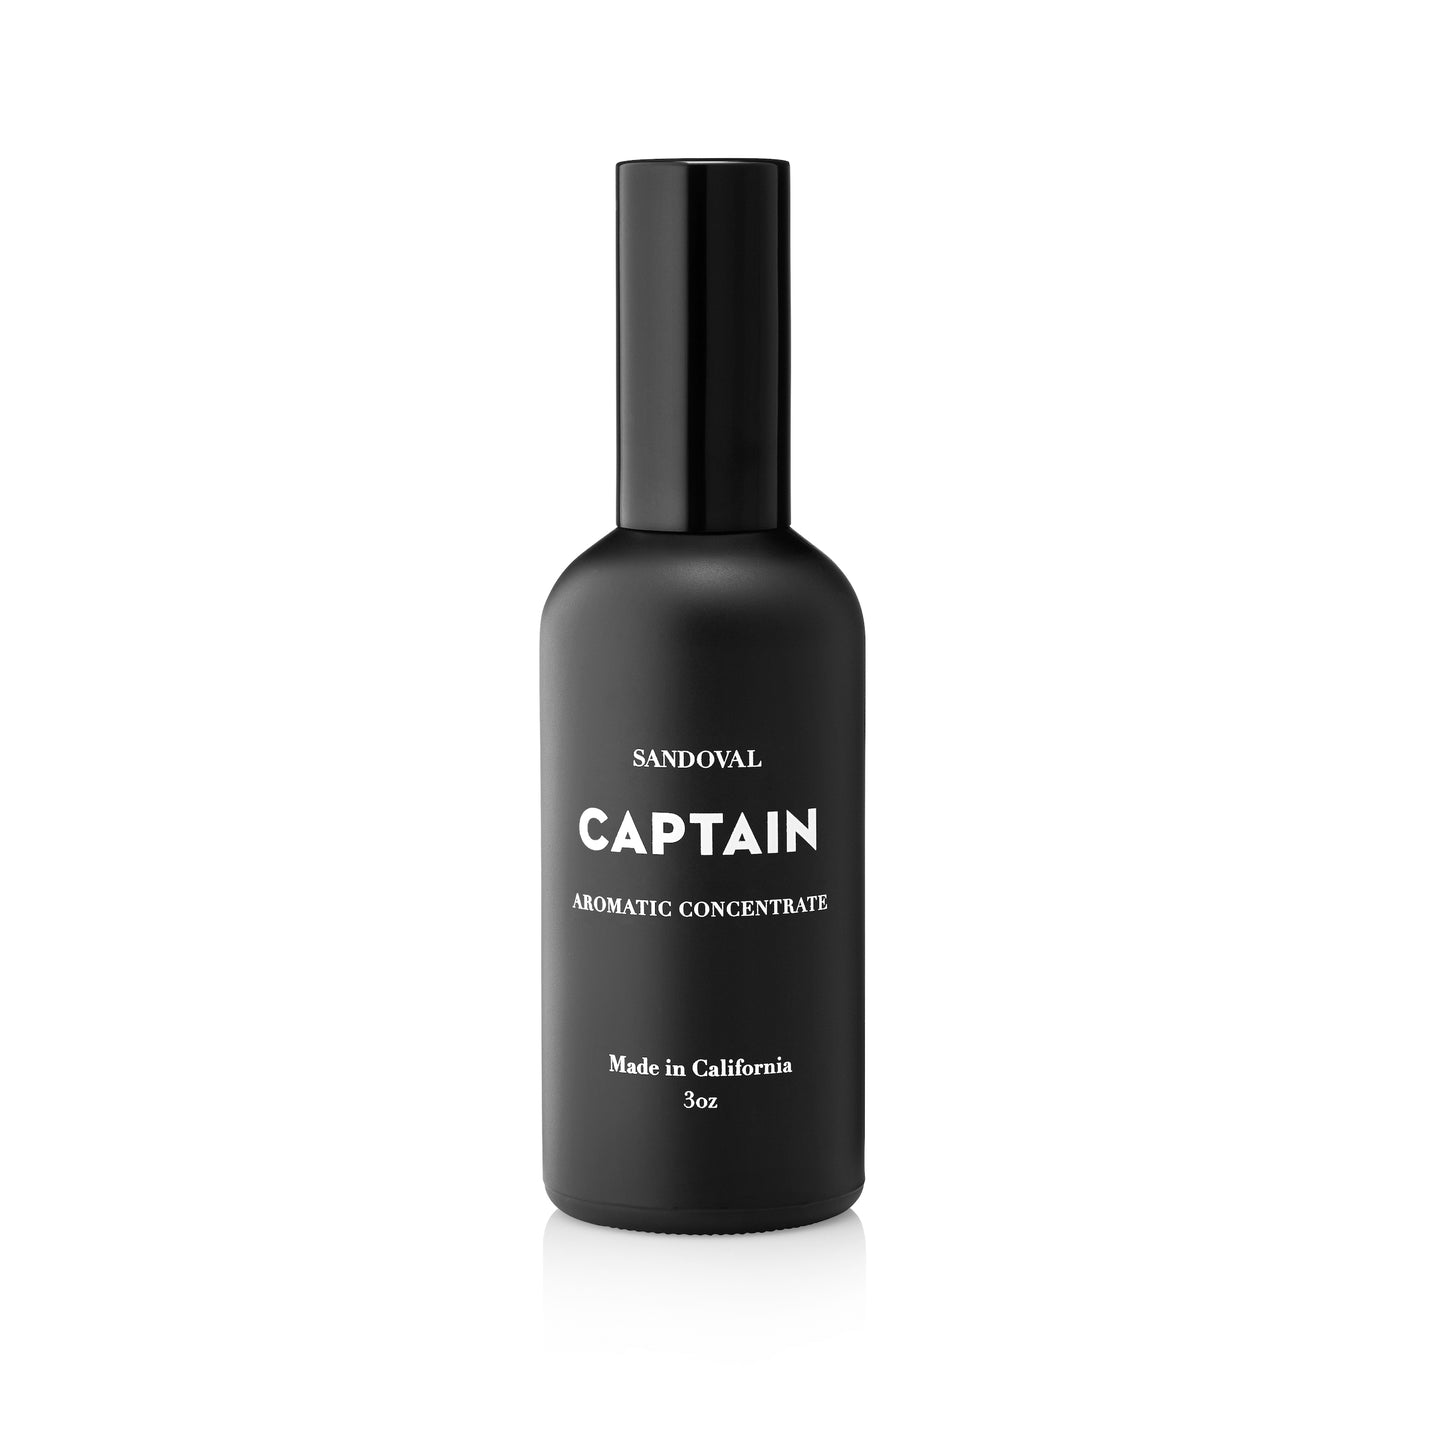 CAPTAIN AROMATIC CONCENTRATE